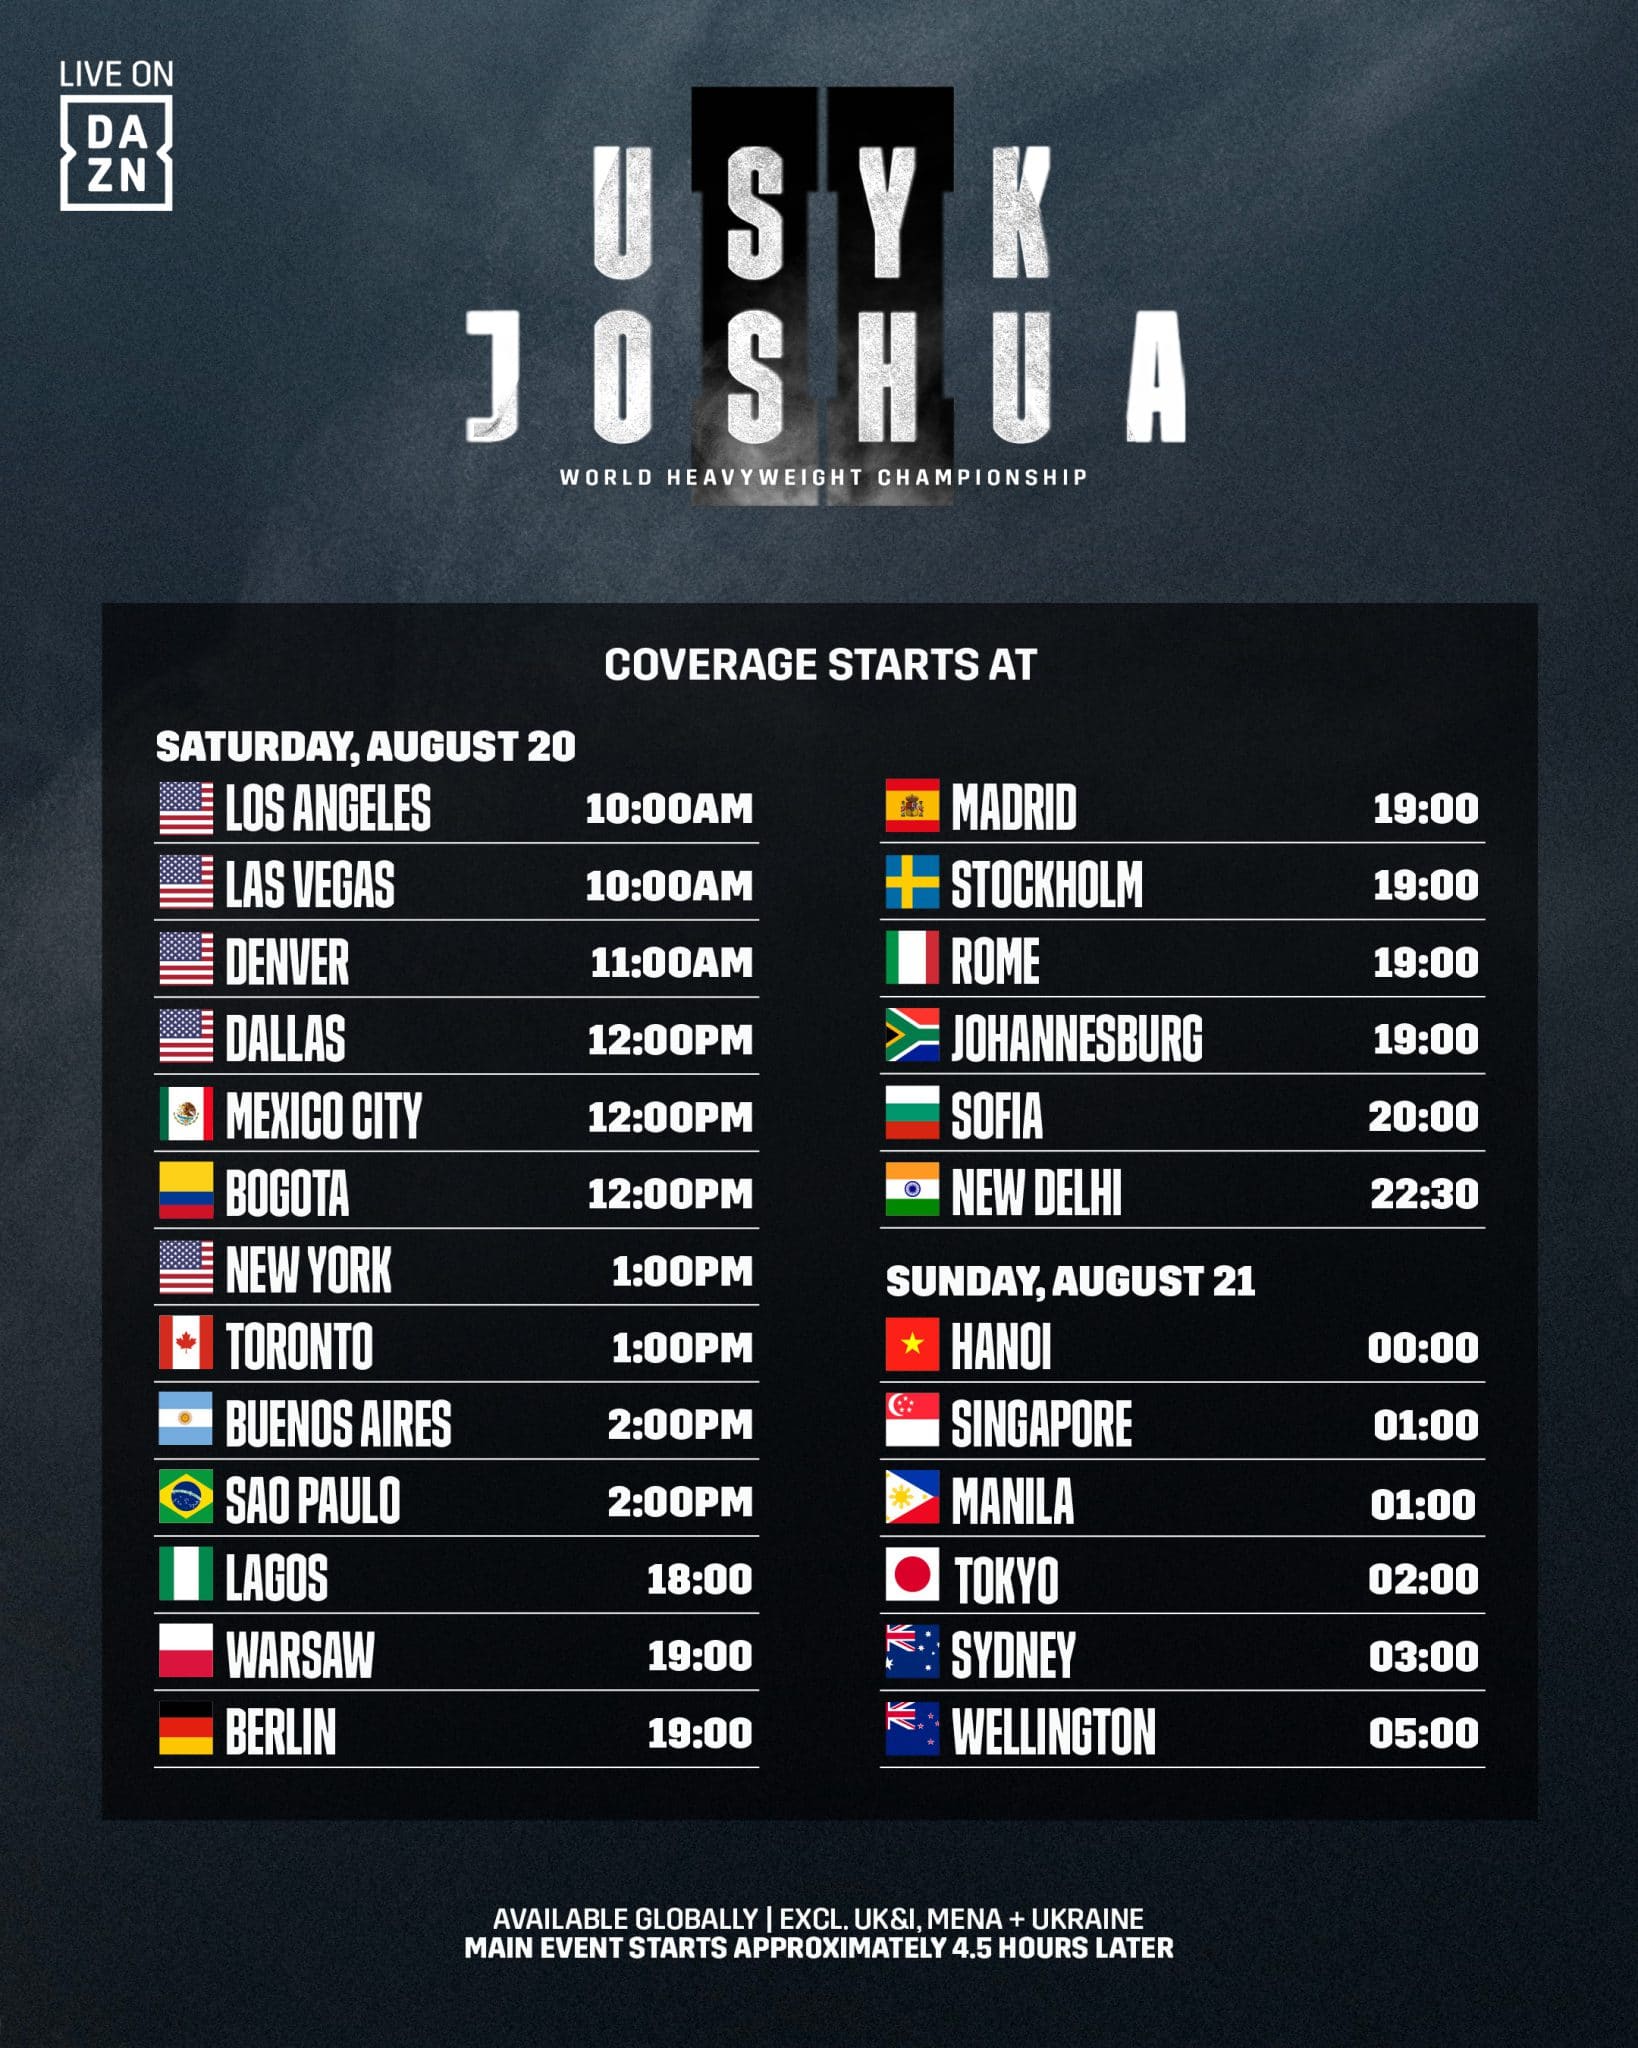 Image: What time does the Usyk vs Joshua fight start in Jeddah?